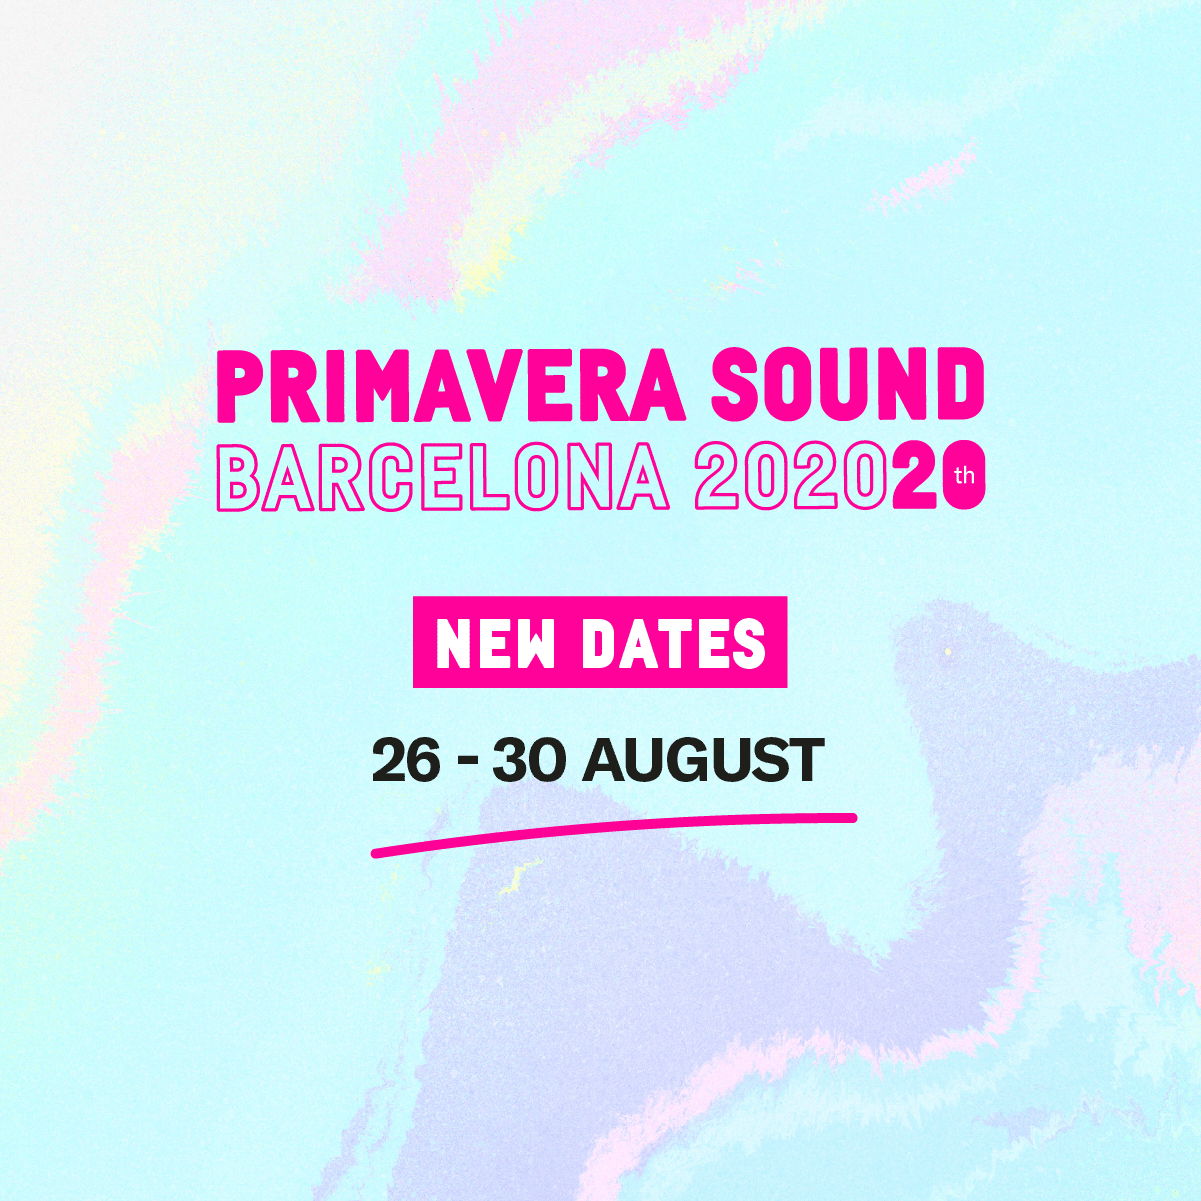 Primavera Sound Barcelona 2020 changes dates and will now take place in August